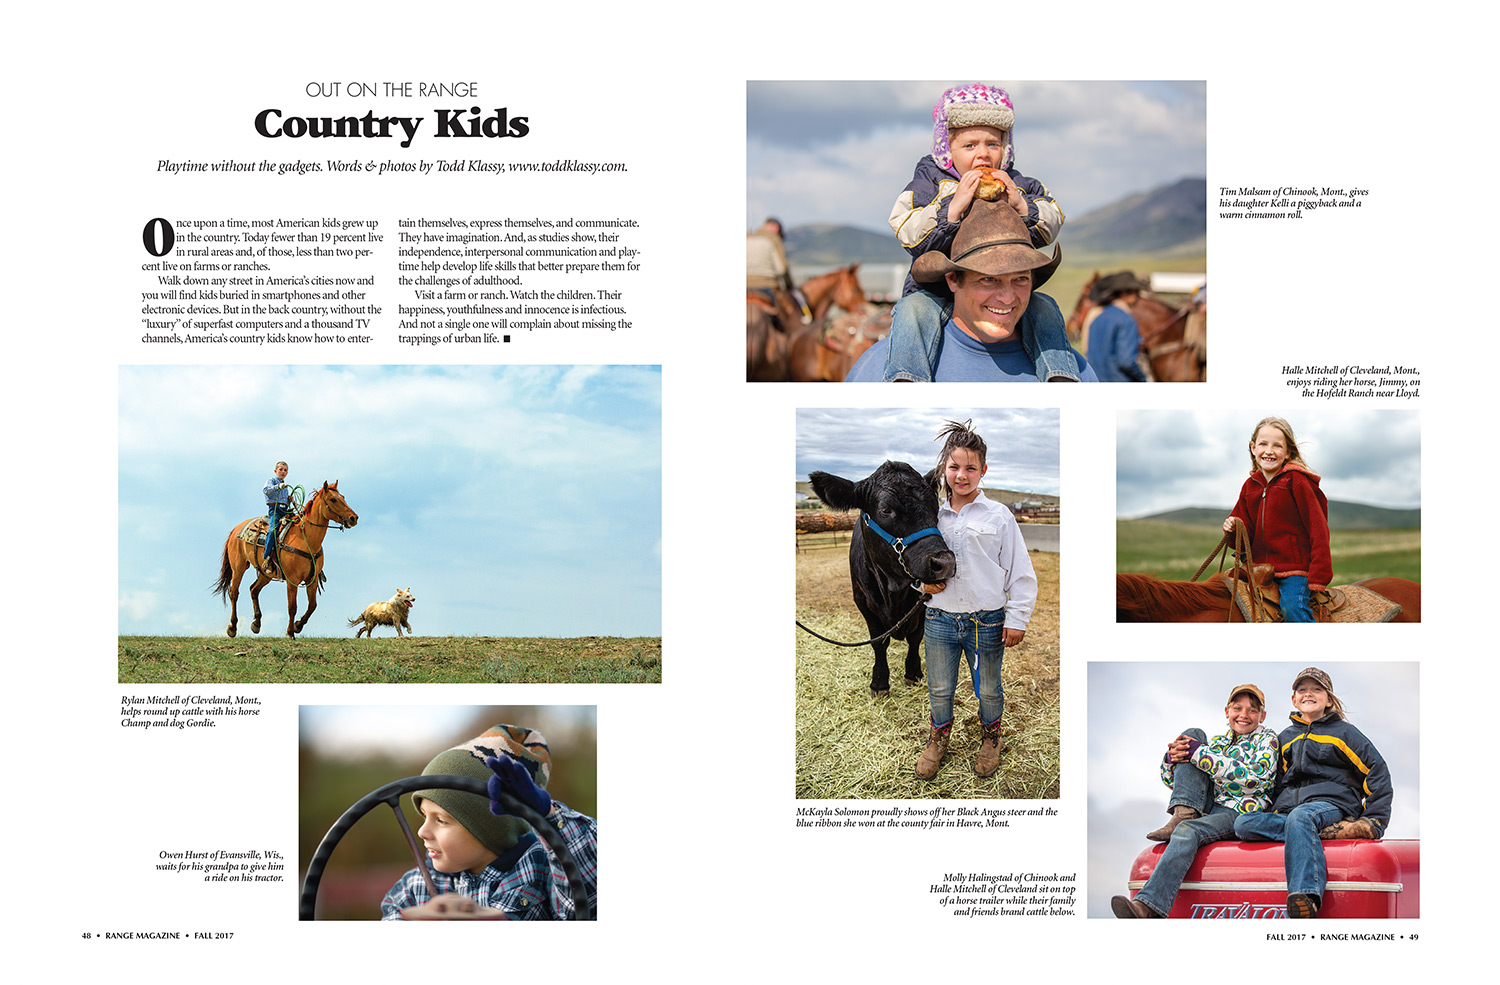 Photos of country kids featured in Range Magazine photo essay